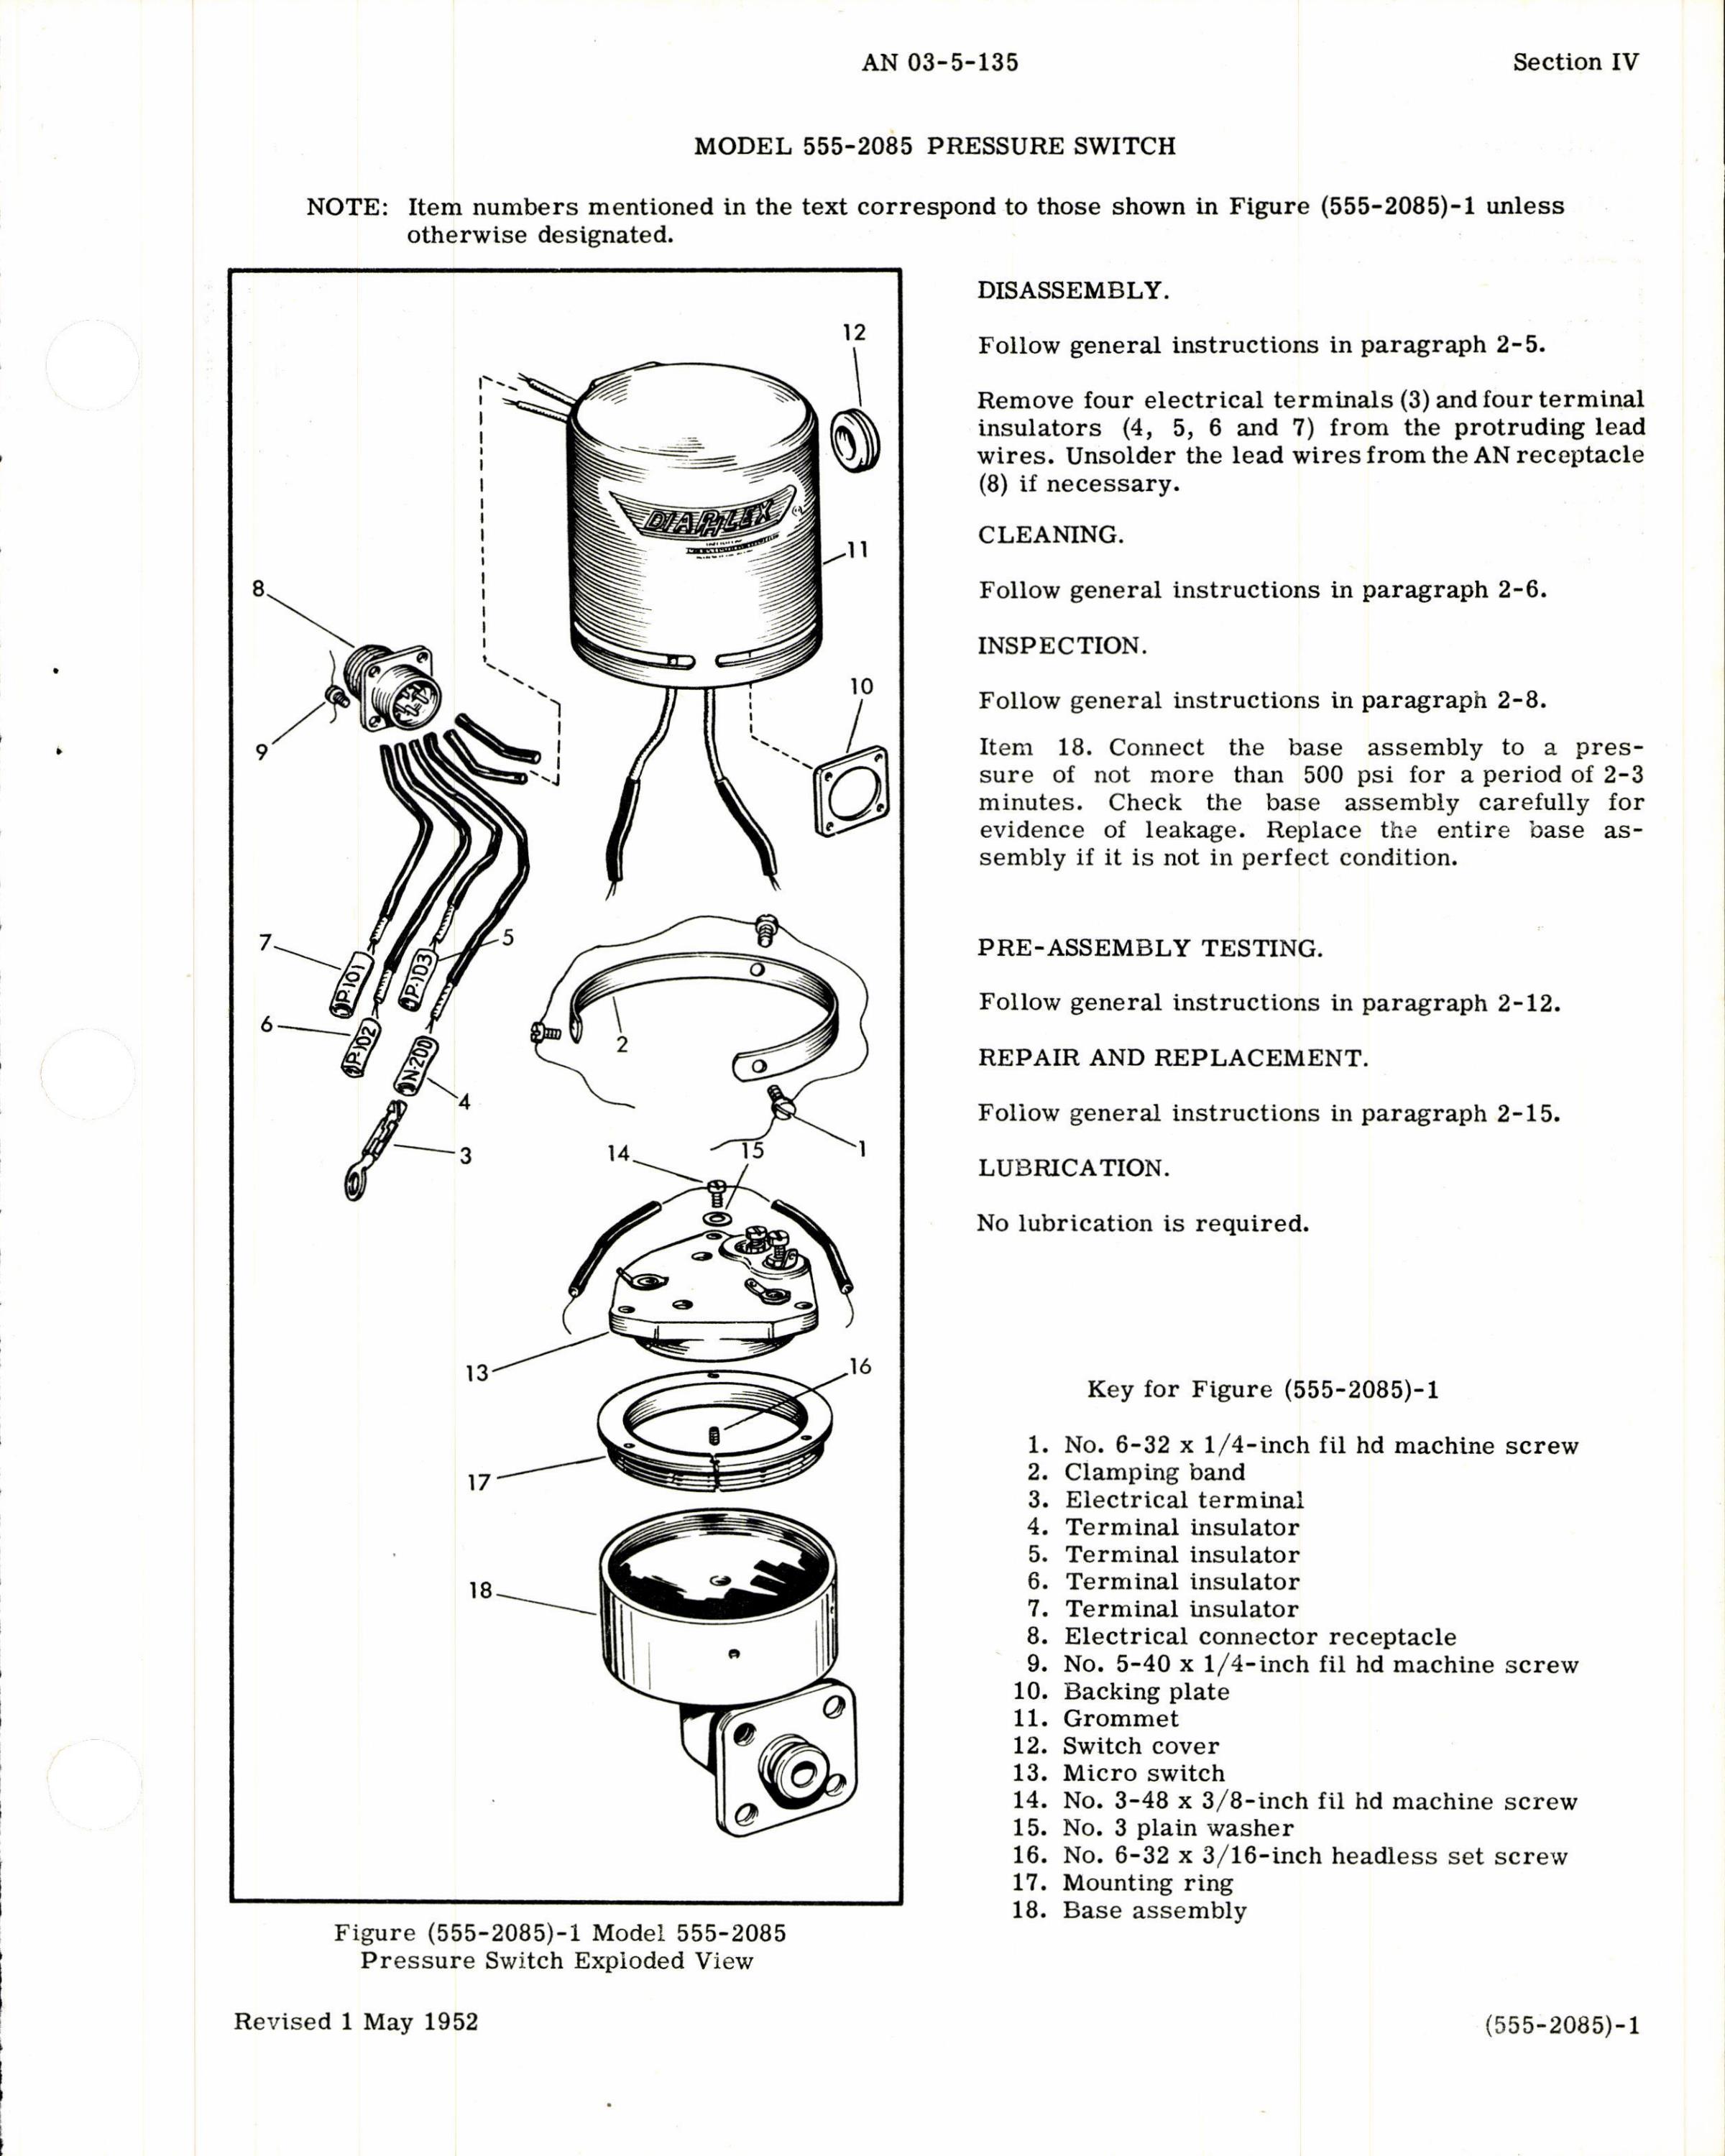 Sample page 5 from AirCorps Library document: Overhaul Instructions for Cook Pressure Control Switches